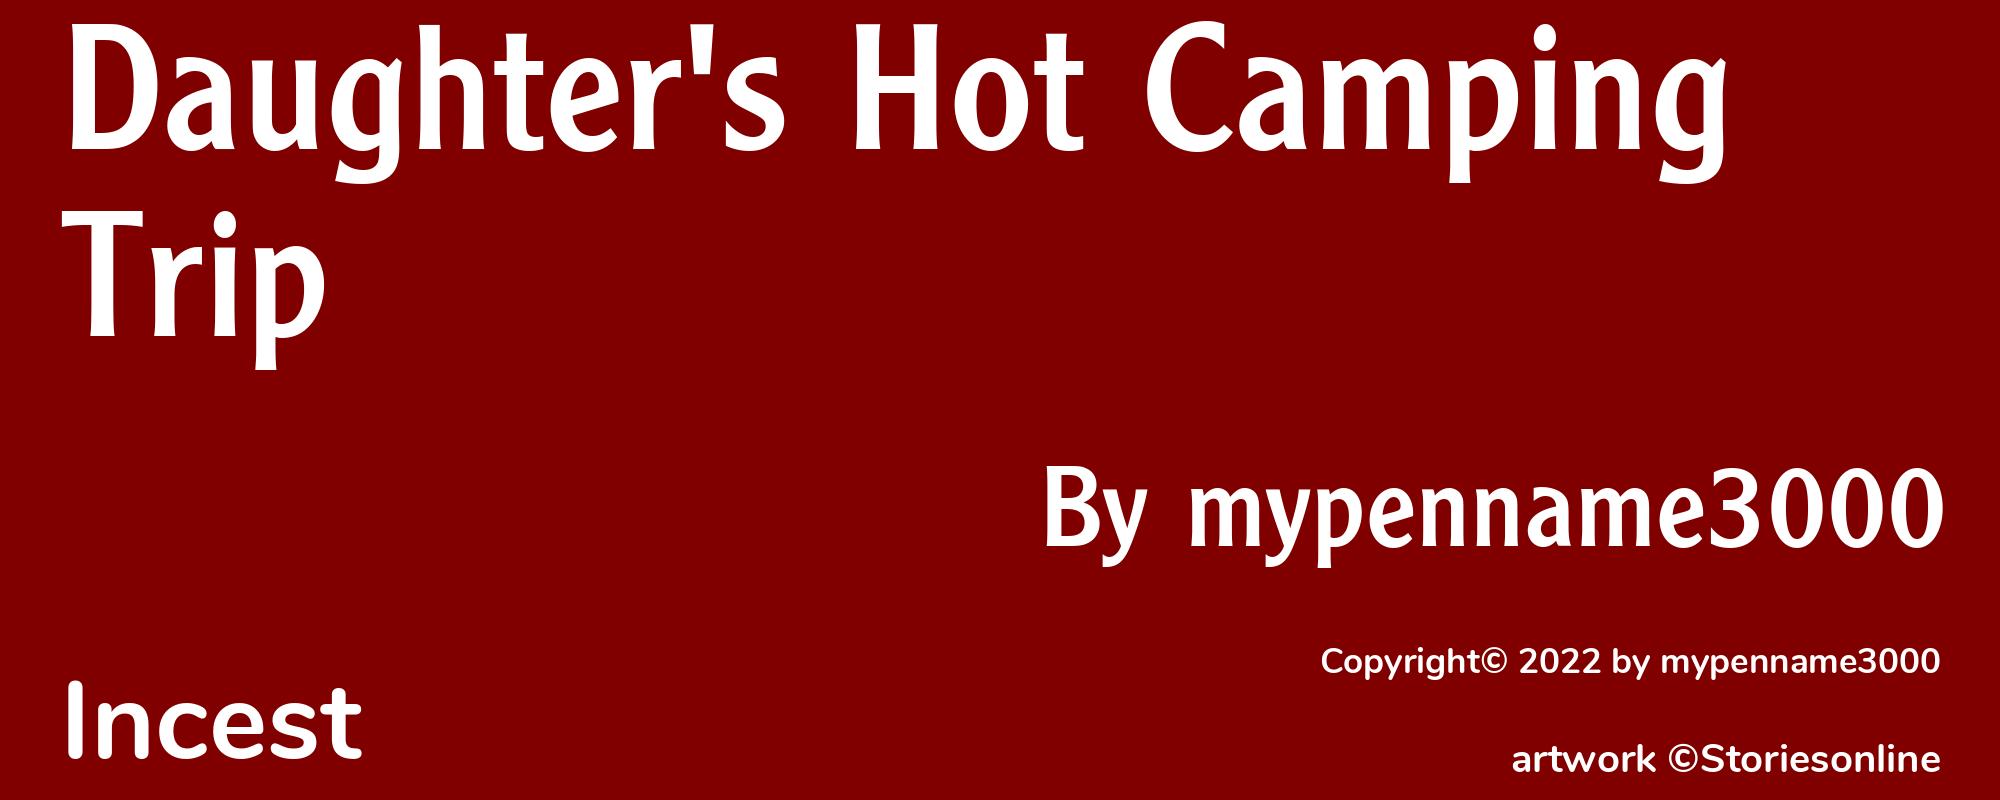 Daughter's Hot Camping Trip - Cover